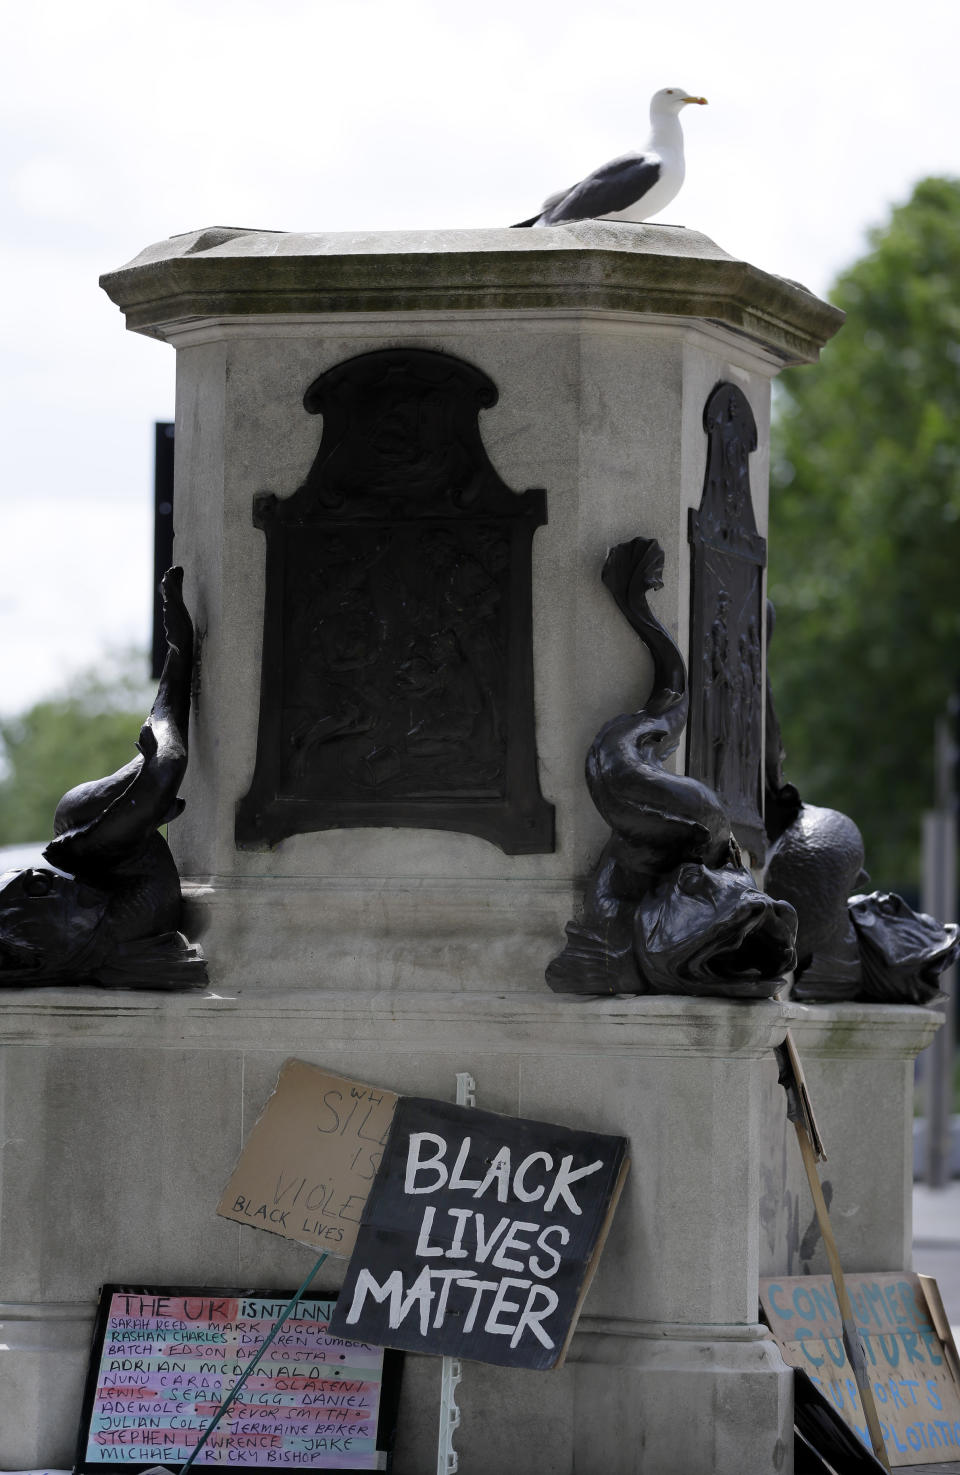 FILE - In this file photo dated Monday, June 8, 2020, a seagull sits on the pedestal of the toppled statue of Edward Colston in Bristol, England. The death of George Floyd at the hands of police and Minneapolis, USA, has sparked a re-examination of injustices and inequalities in the fabric of many societies, often symbolized in statues of historical figures have become the focus of protest around the world. (AP Photo/Kirsty Wigglesworth, FILE)